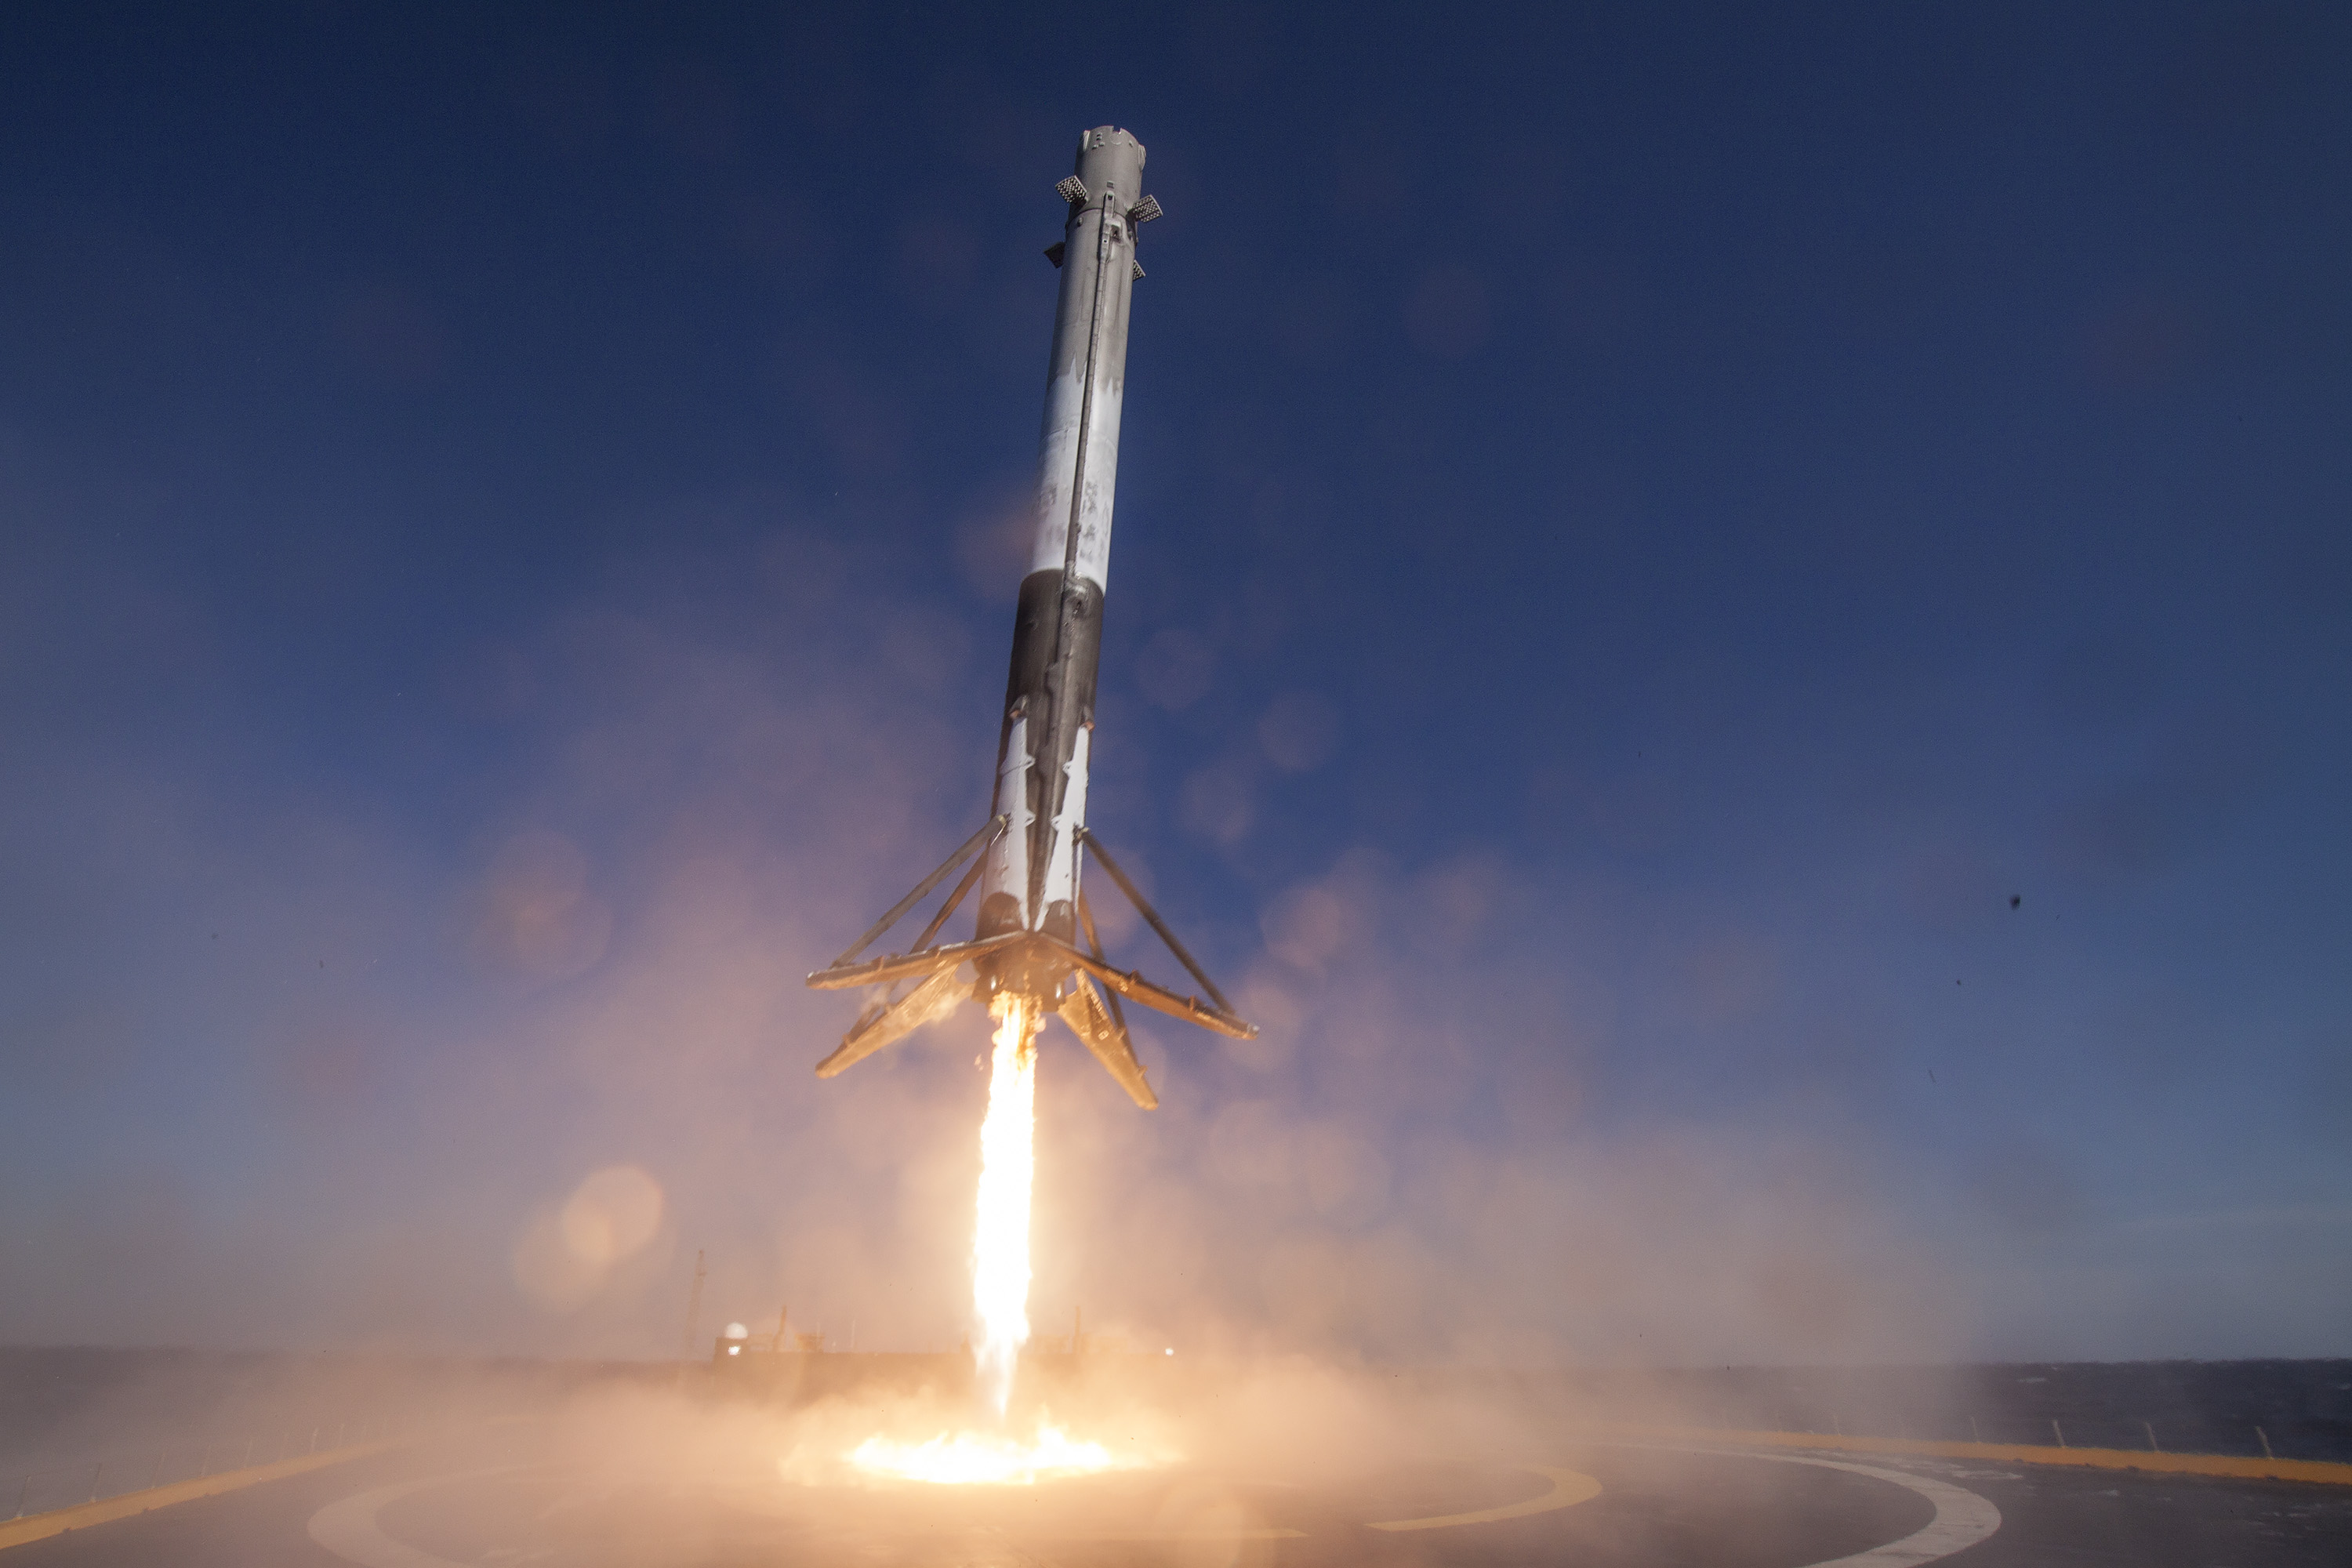 In this handout provided by the National Aeronautics and Space Administration (NASA), SpaceX's Falcon 9 rocket makes its first successful upright landing on the  Of Course I Still Love You  droneship on April 8, 2016 some 200 miles off shore in the Atlantic Ocean after launching from Cape Canaveral, Florida.